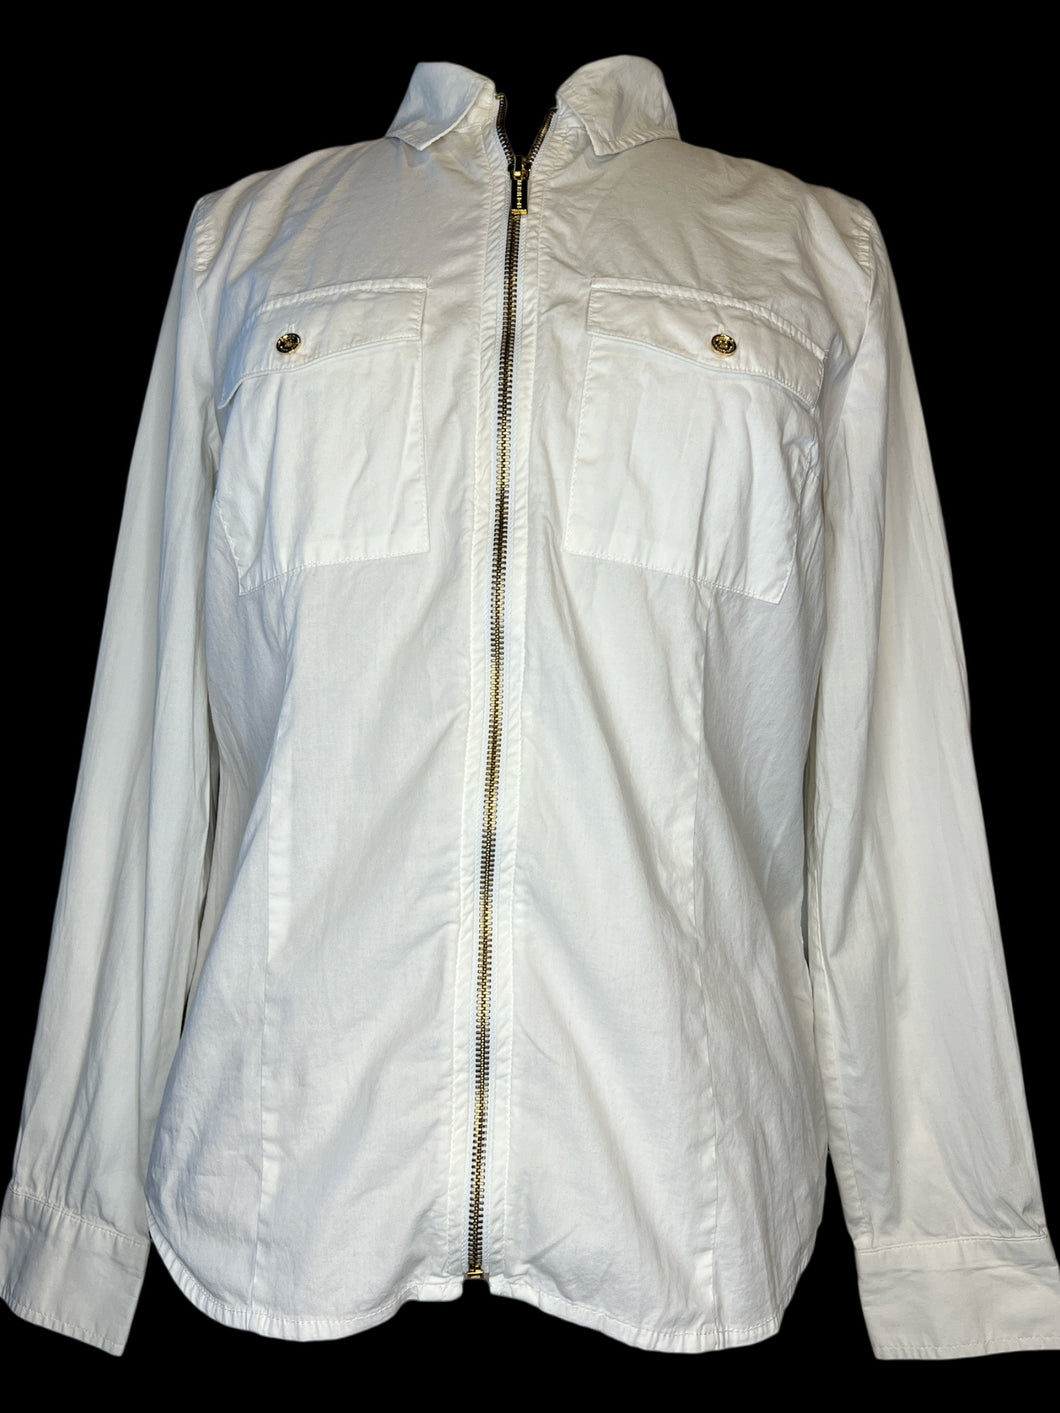 L White long sleeve button down collared top w/ gold-like zipper front, button chest pockets, & button cuffs